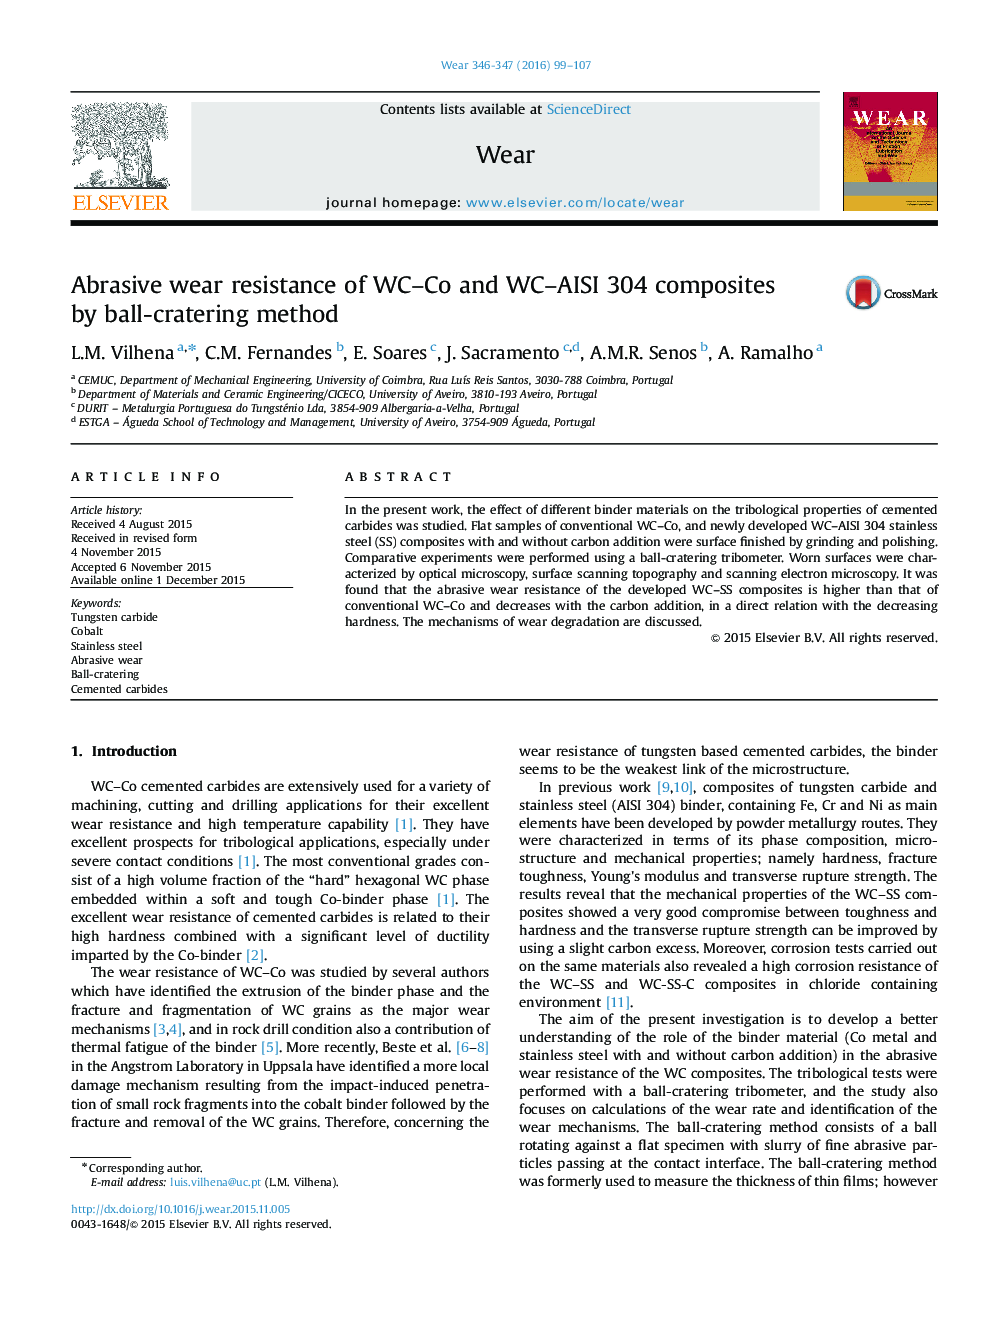 Abrasive wear resistance of WC–Co and WC–AISI 304 composites by ball-cratering method